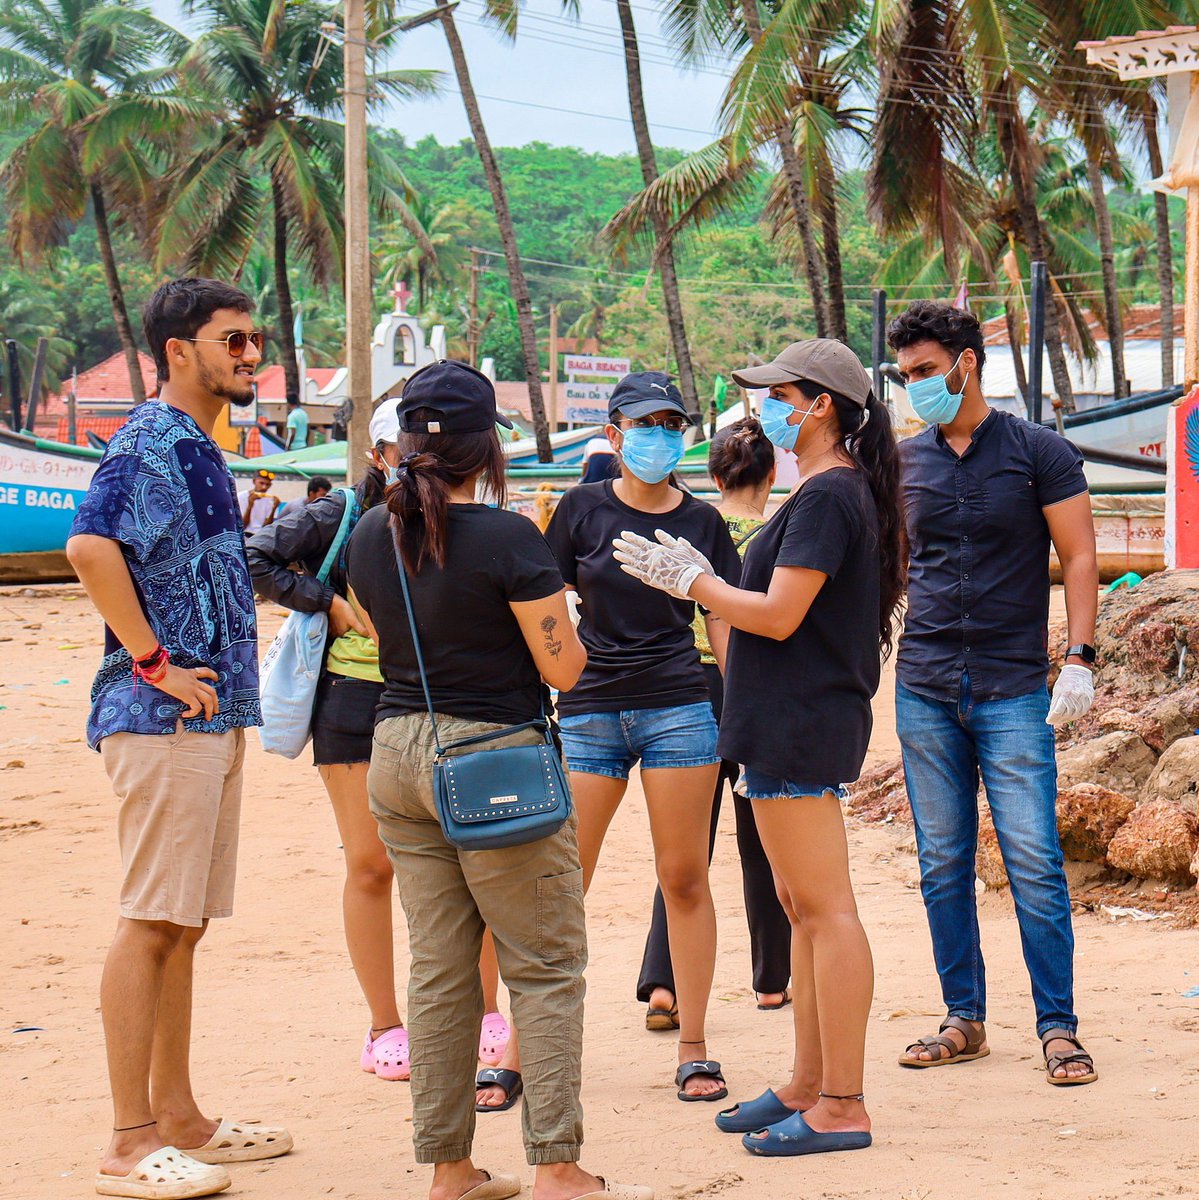 'Every piece of trash collected is a step towards a cleaner, healthier ocean. Join our beach clean-up drive and make a difference!' 
.
Follow us at @ihelp_clean_goa for more updates.
.
#swachhbharat #ihelpcleangoa #cleanlinessdrive #ihelpfoundationgoa #goa #india